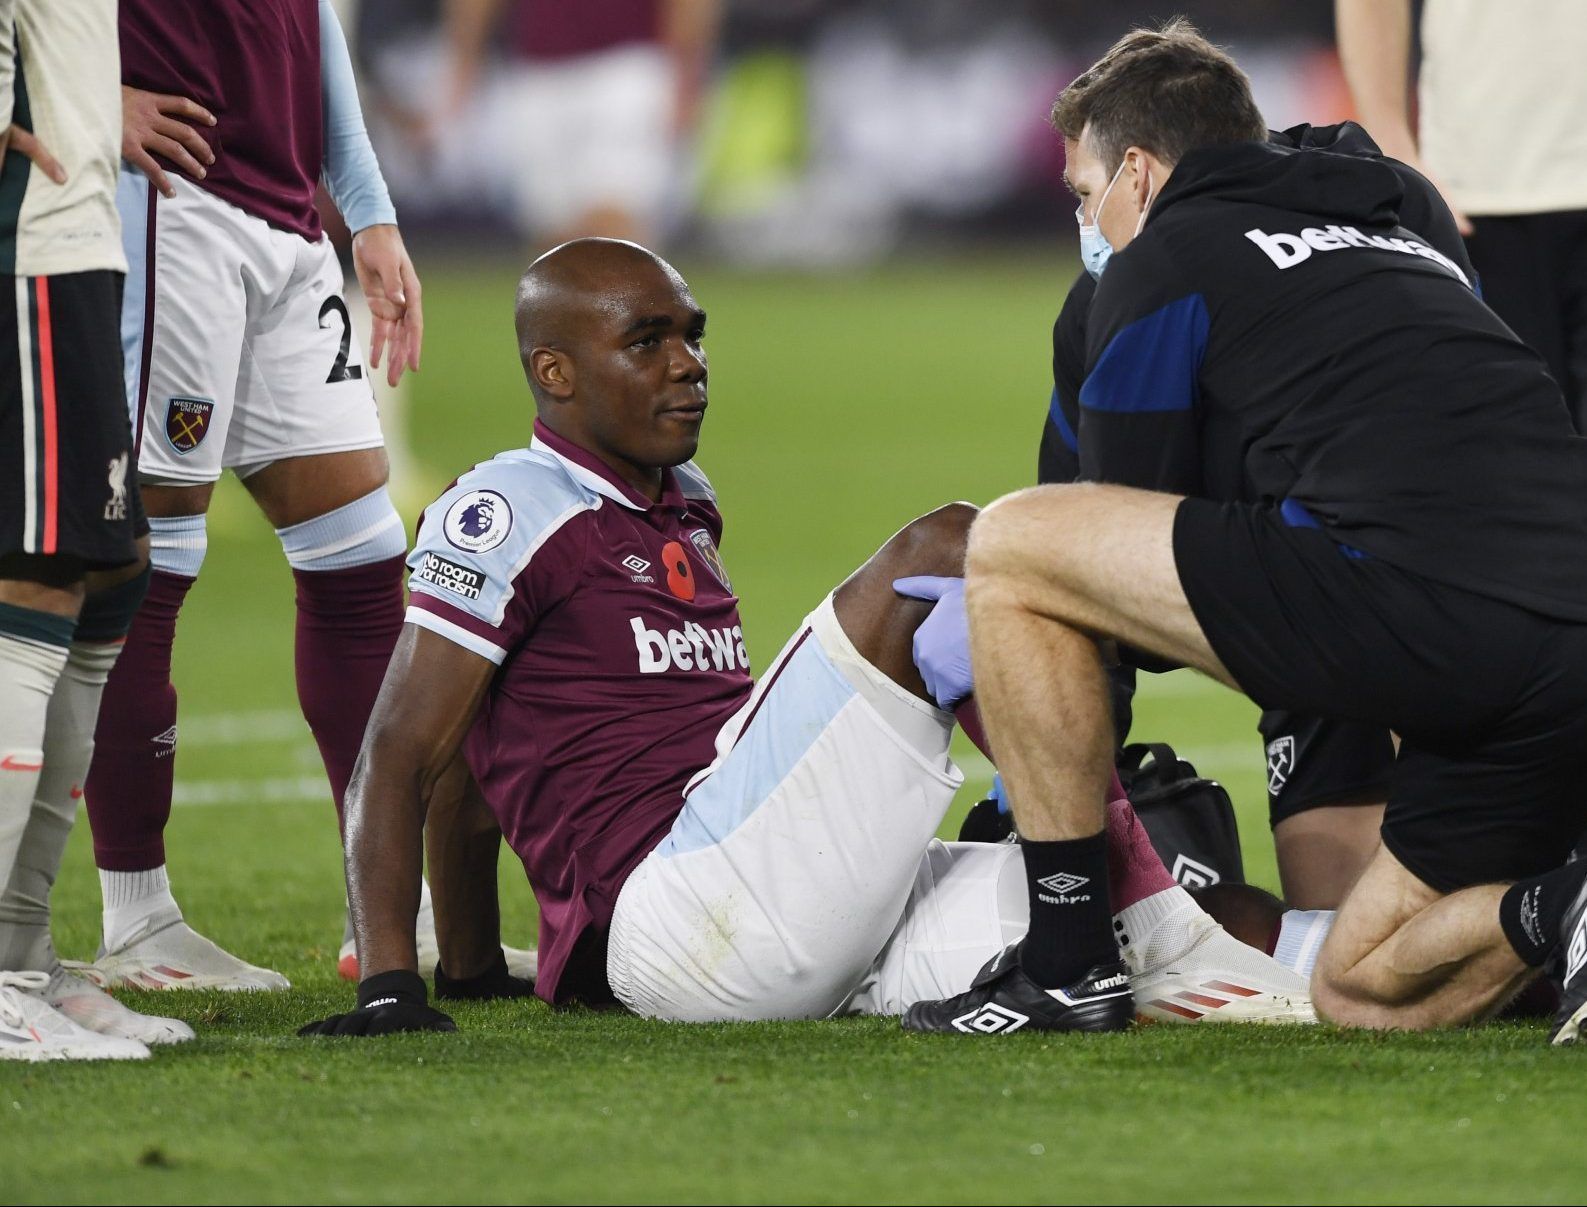 West Ham defender Angelo Ogbonna receives treatment after injury against Liverpool in the Premier League